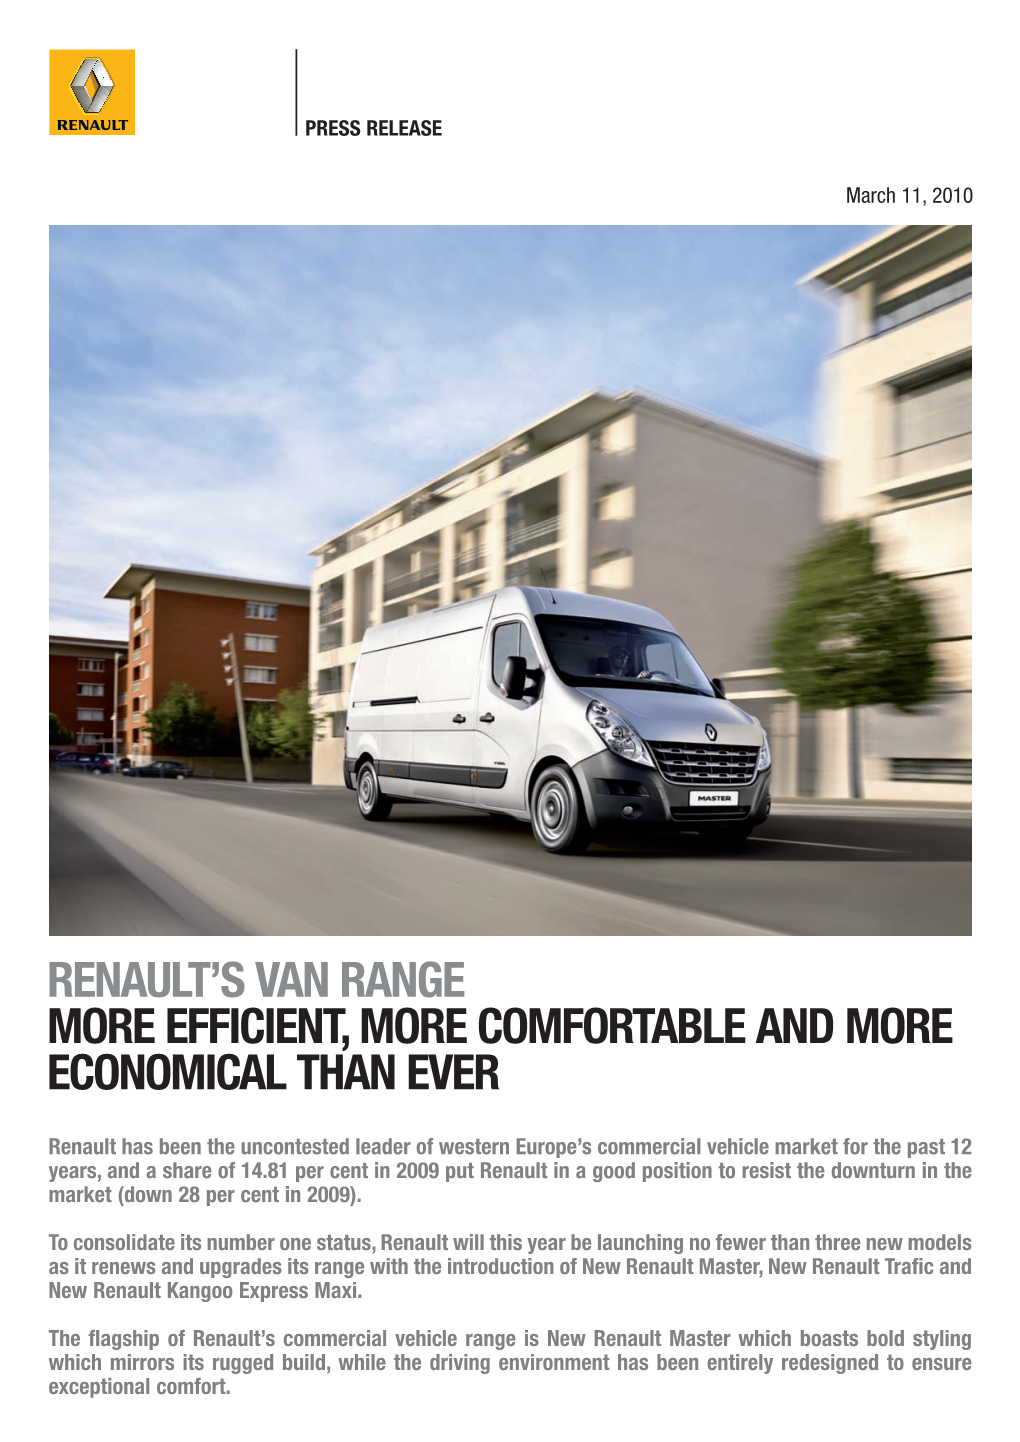 Renault's Van Range More Efficient, More Comfortable and More Economical Than Ever